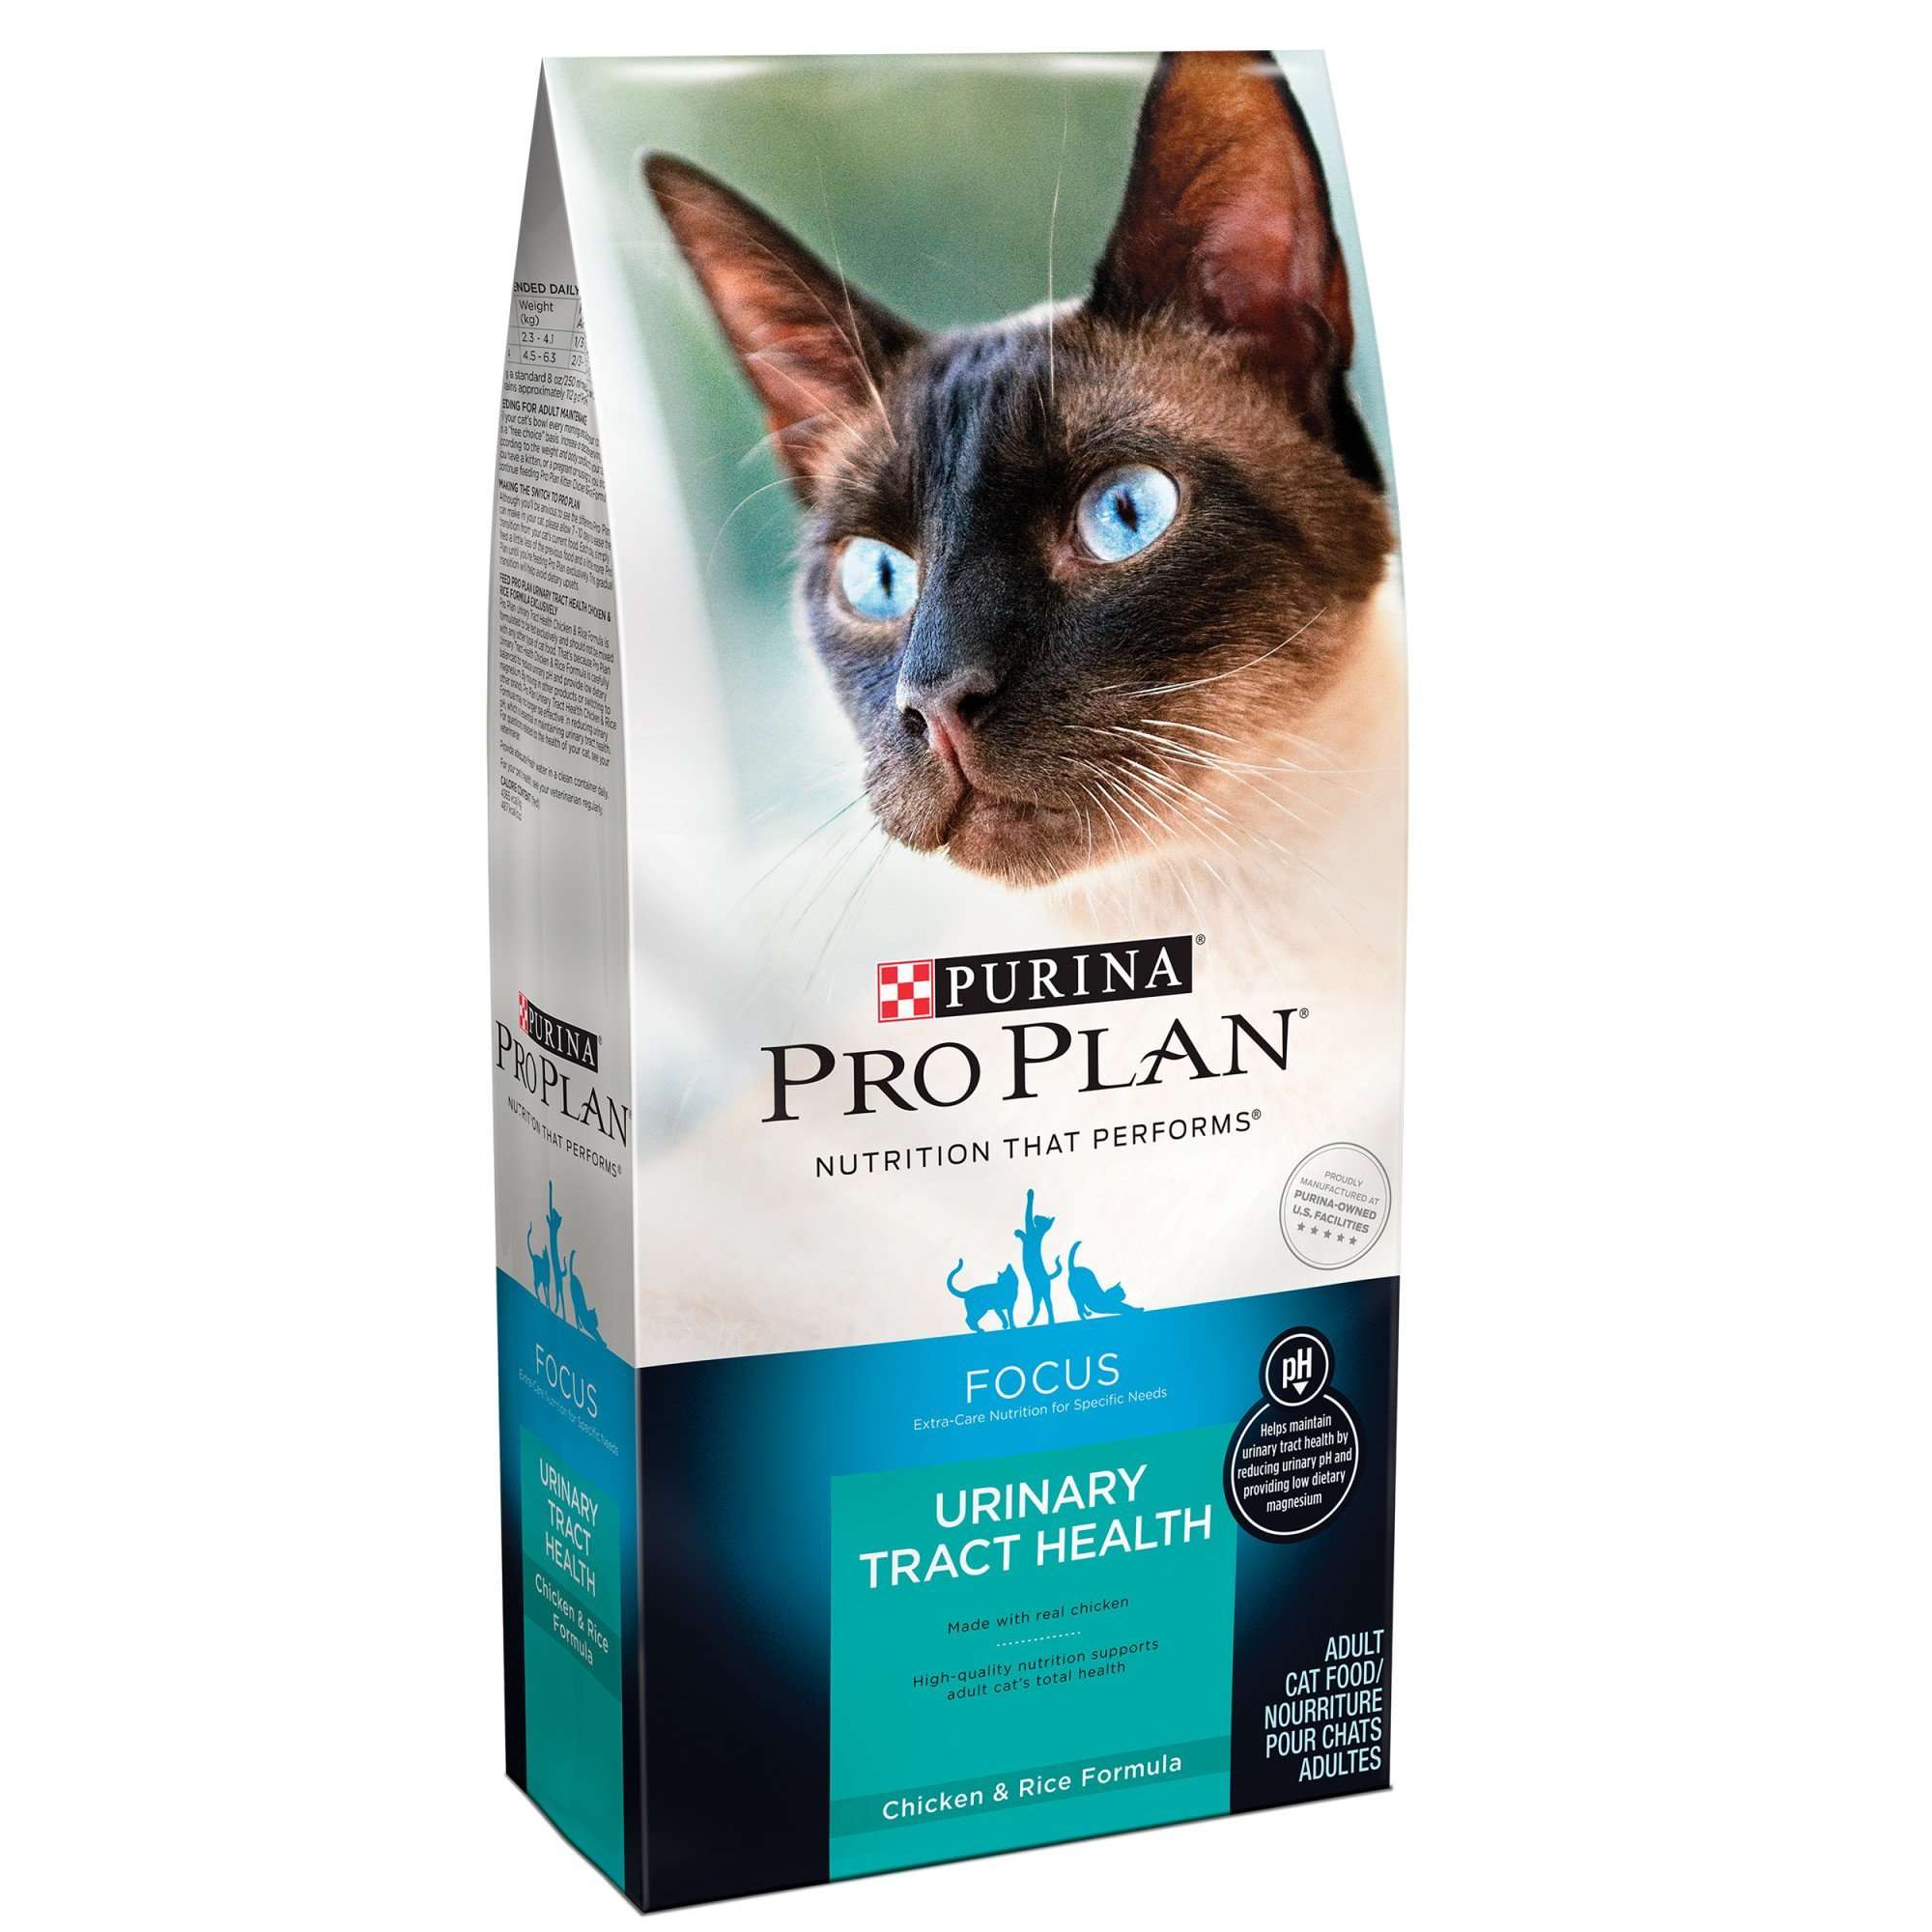 Pro Plan Focus Urinary Tract Health Cat Food, 3.5 lbs ...